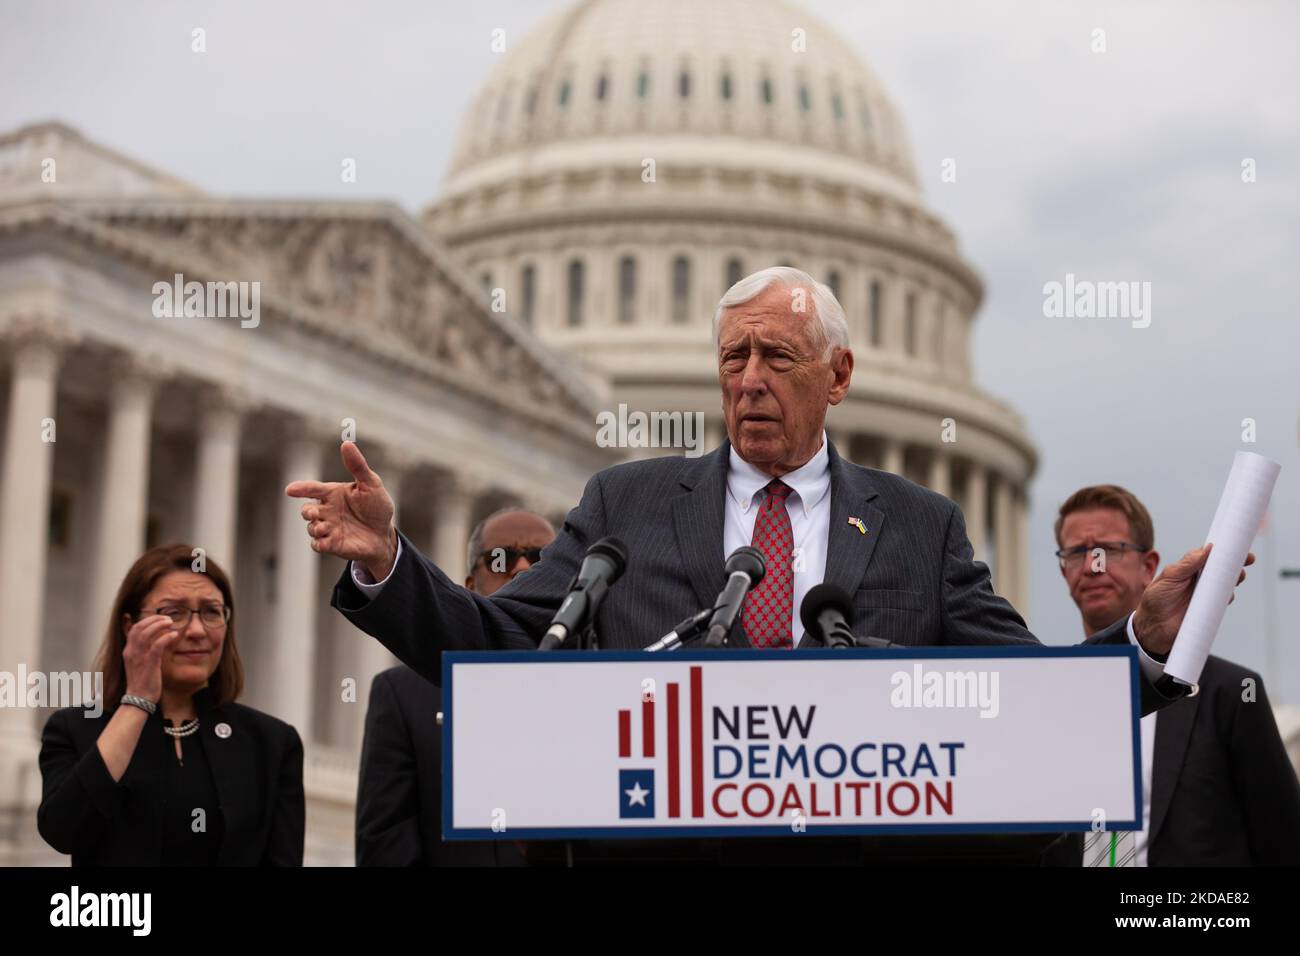 House Majority Leader Steny Hoyer (D-MD) speaks during a press conference marking the 25th anniversary of the New Democrat Coalition. The 98 members of the New Democrats are centrists and pro-business. (Photo by Allison Bailey/NurPhoto) Stock Photo